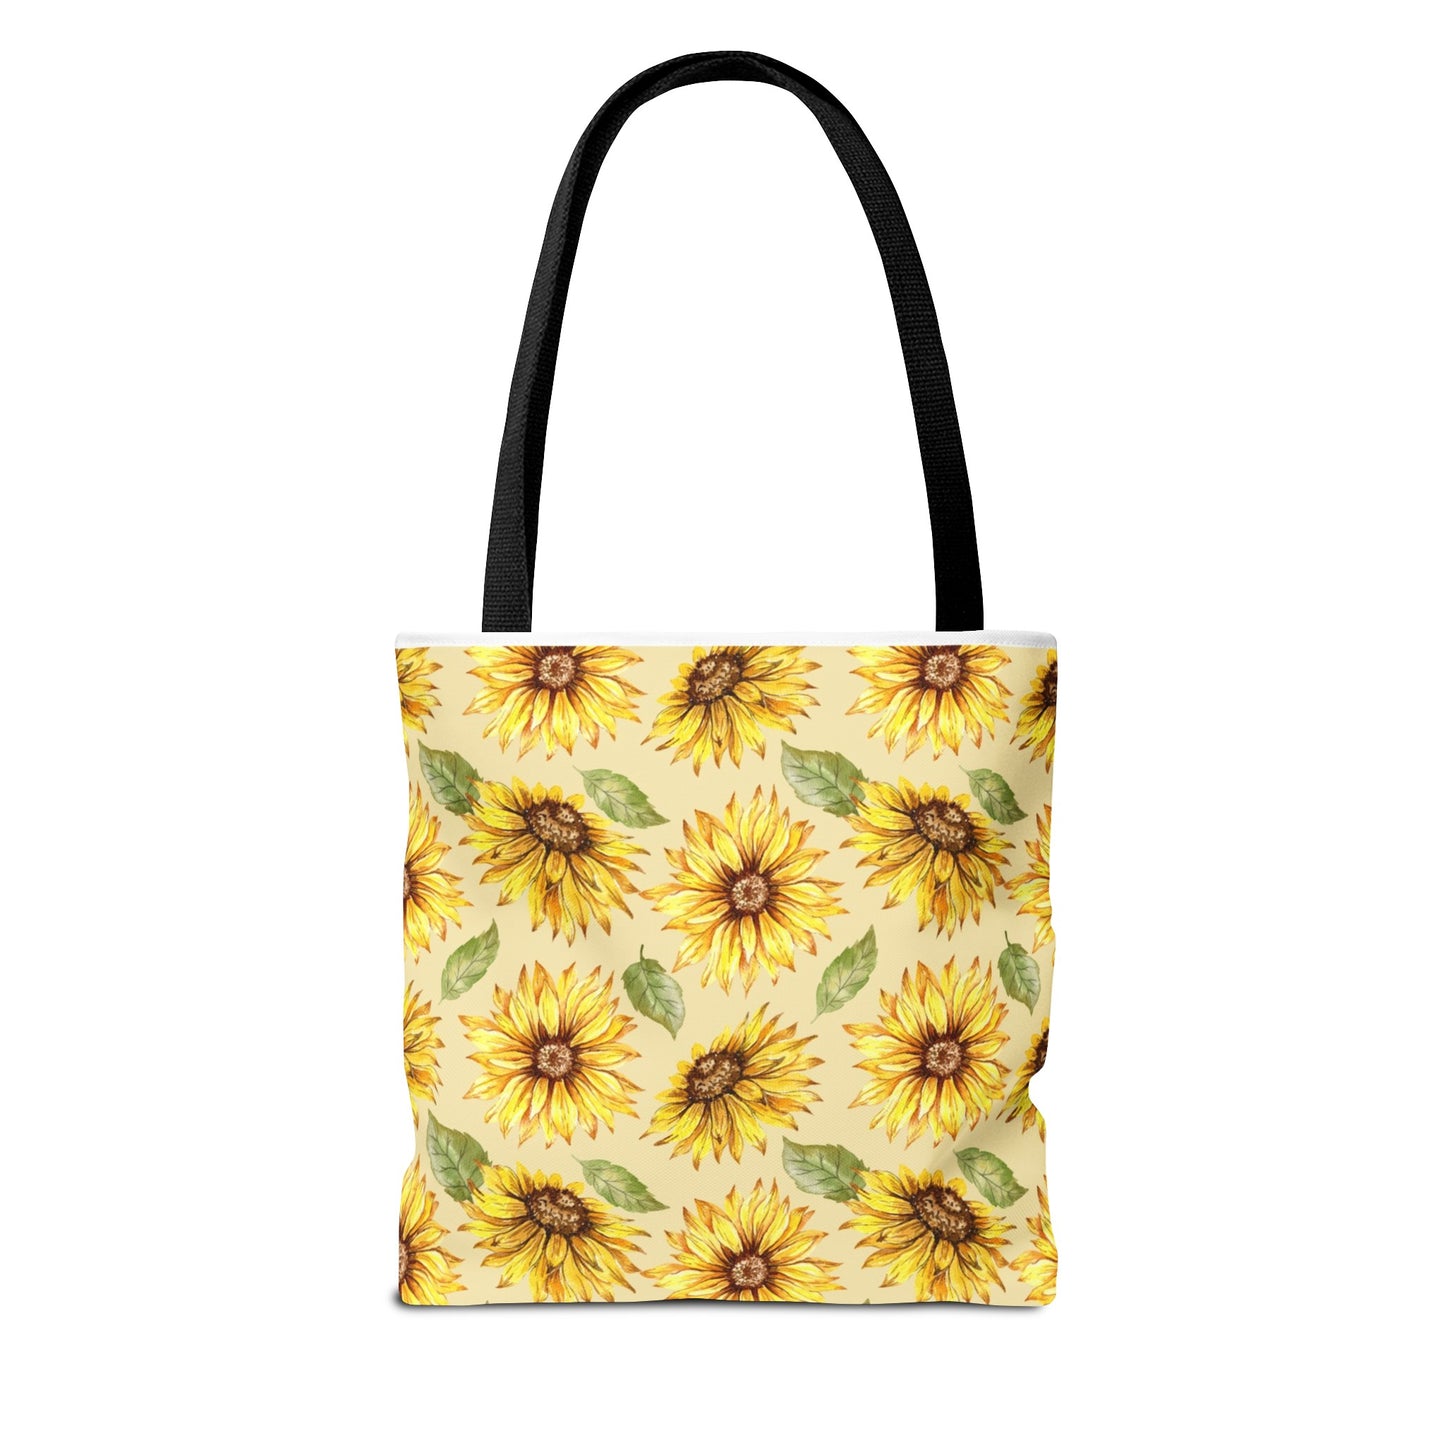 A Printify polyester tote bag with a Yellow Floral Sunflower print on a white background.